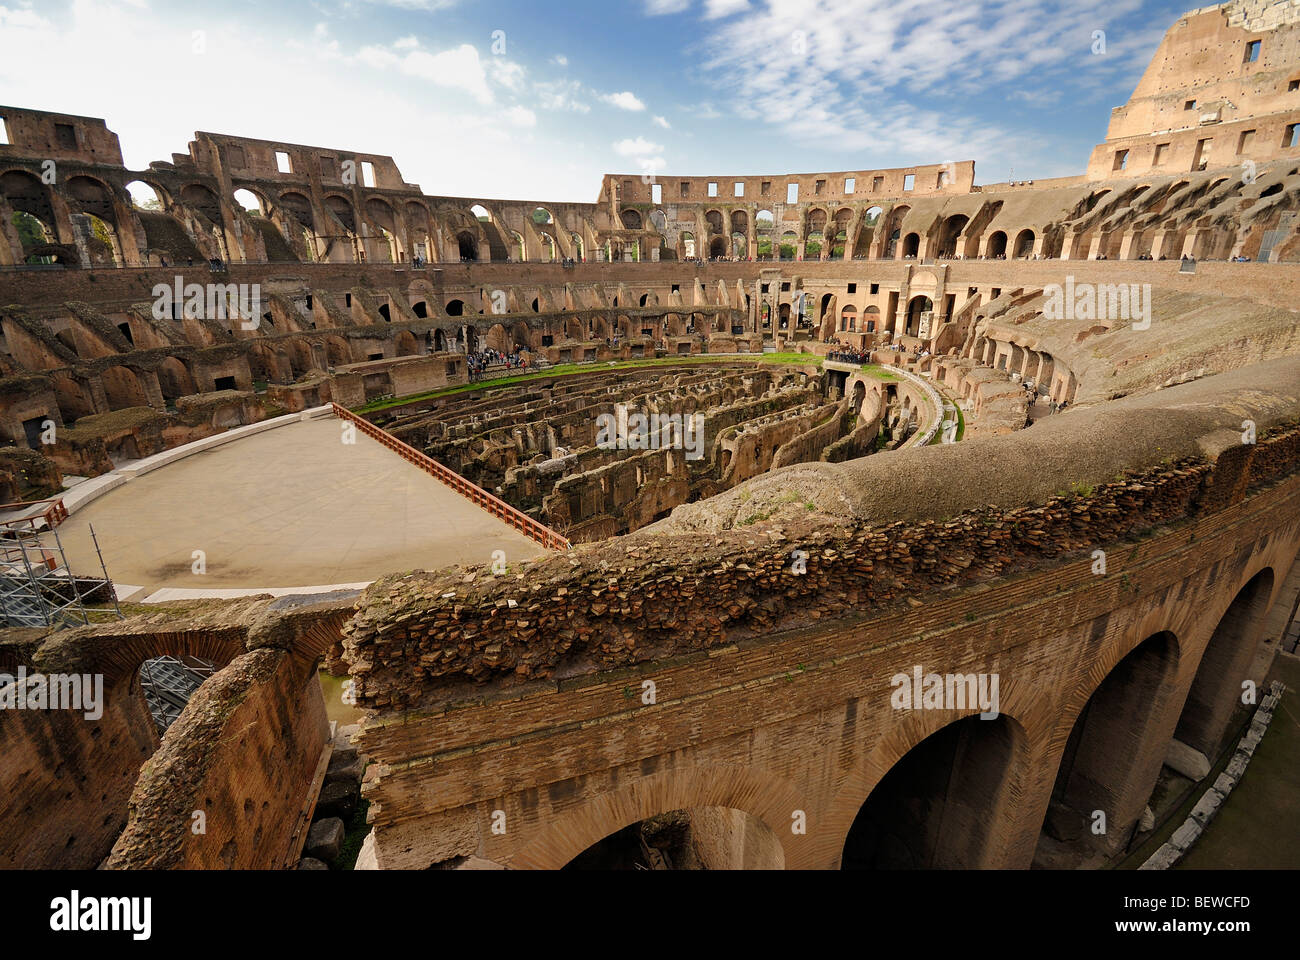 View over the internal space of the Colosseum, Rome, Italy, wide-angle shot Stock Photo